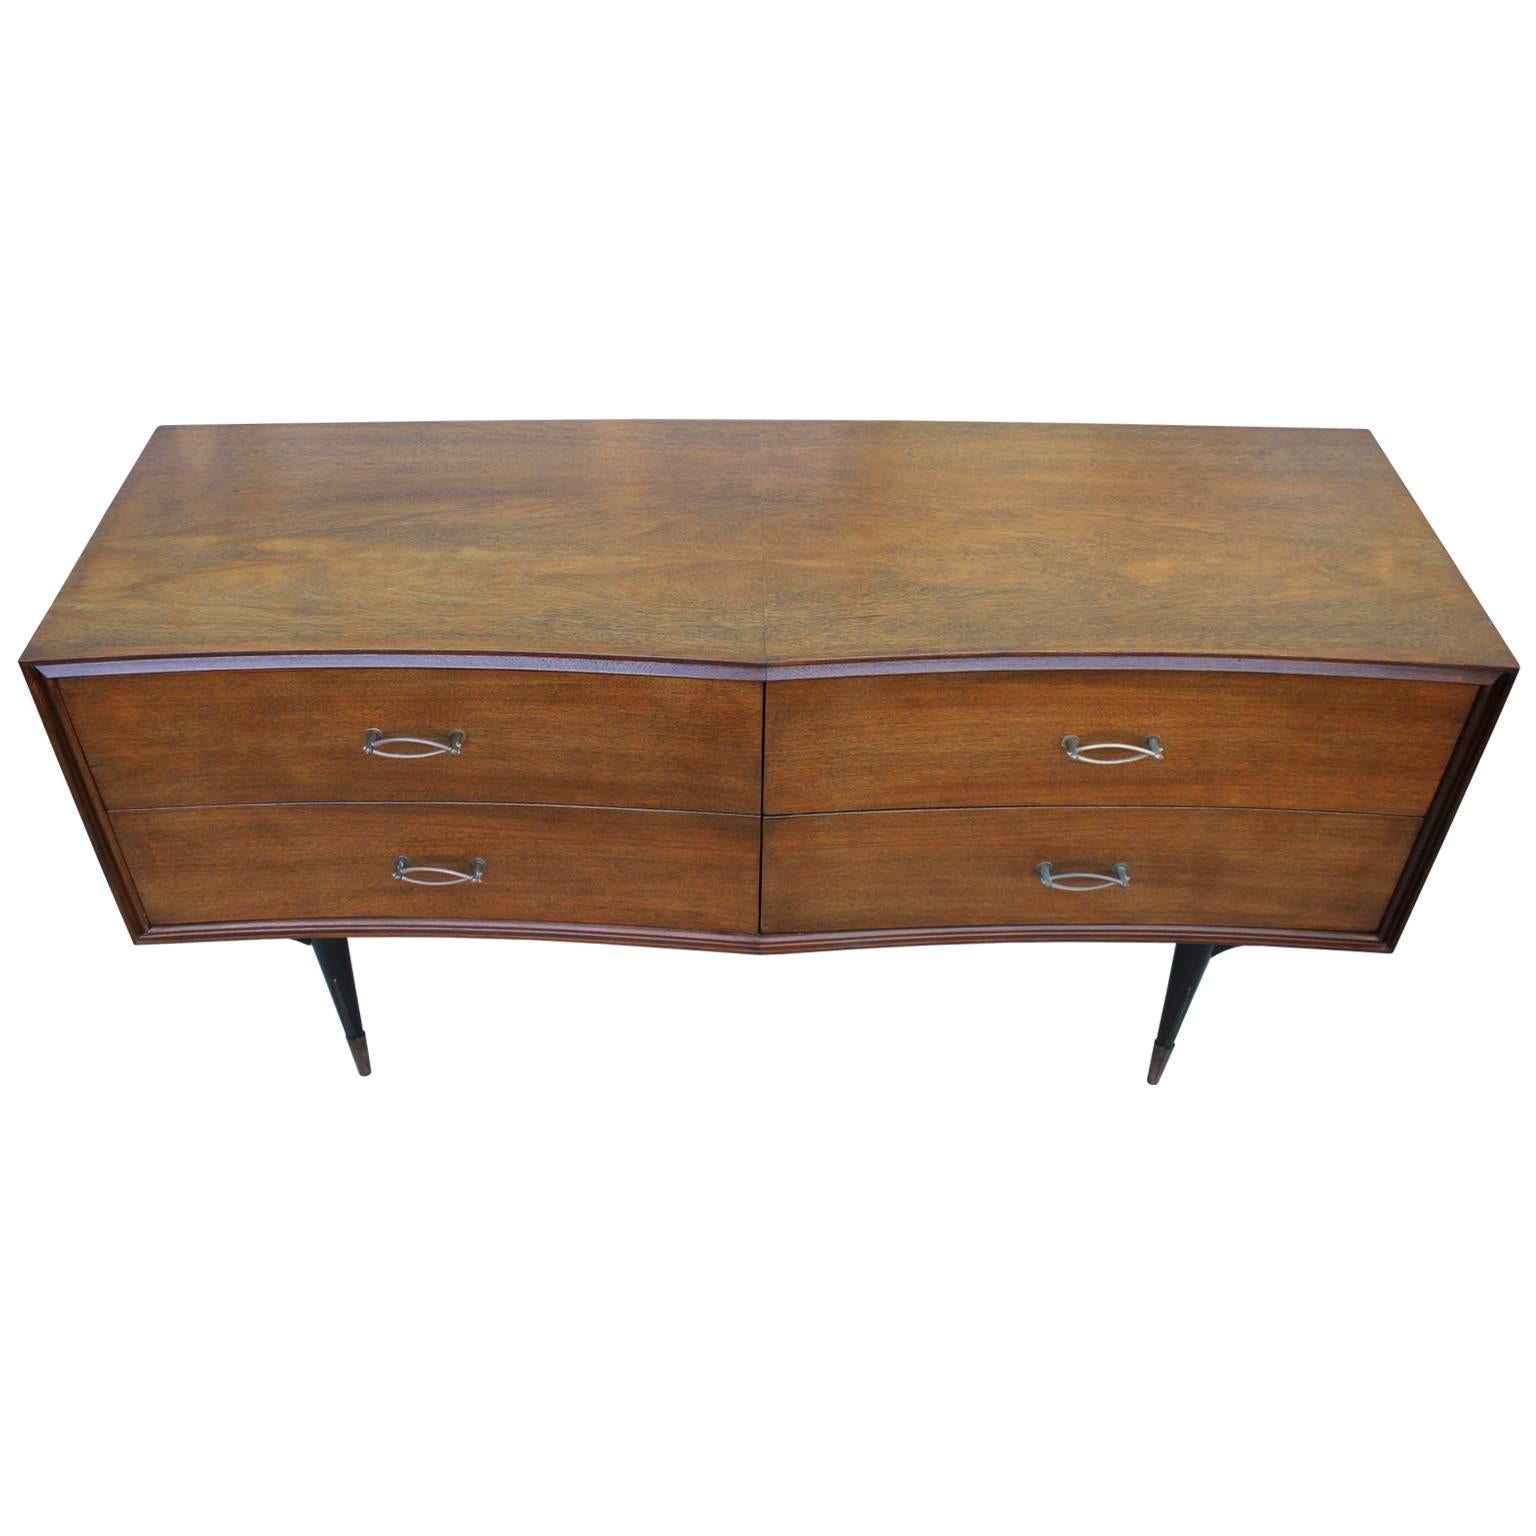 Sculptural Italian dresser. Dresser has stunning lines with a double bowed in front and delicate tapered legs. Finished in a medium walnut. Lovely twisted hardware and accents finishes off the chest nicely. Excellent in a Mid-Century, Hollywood